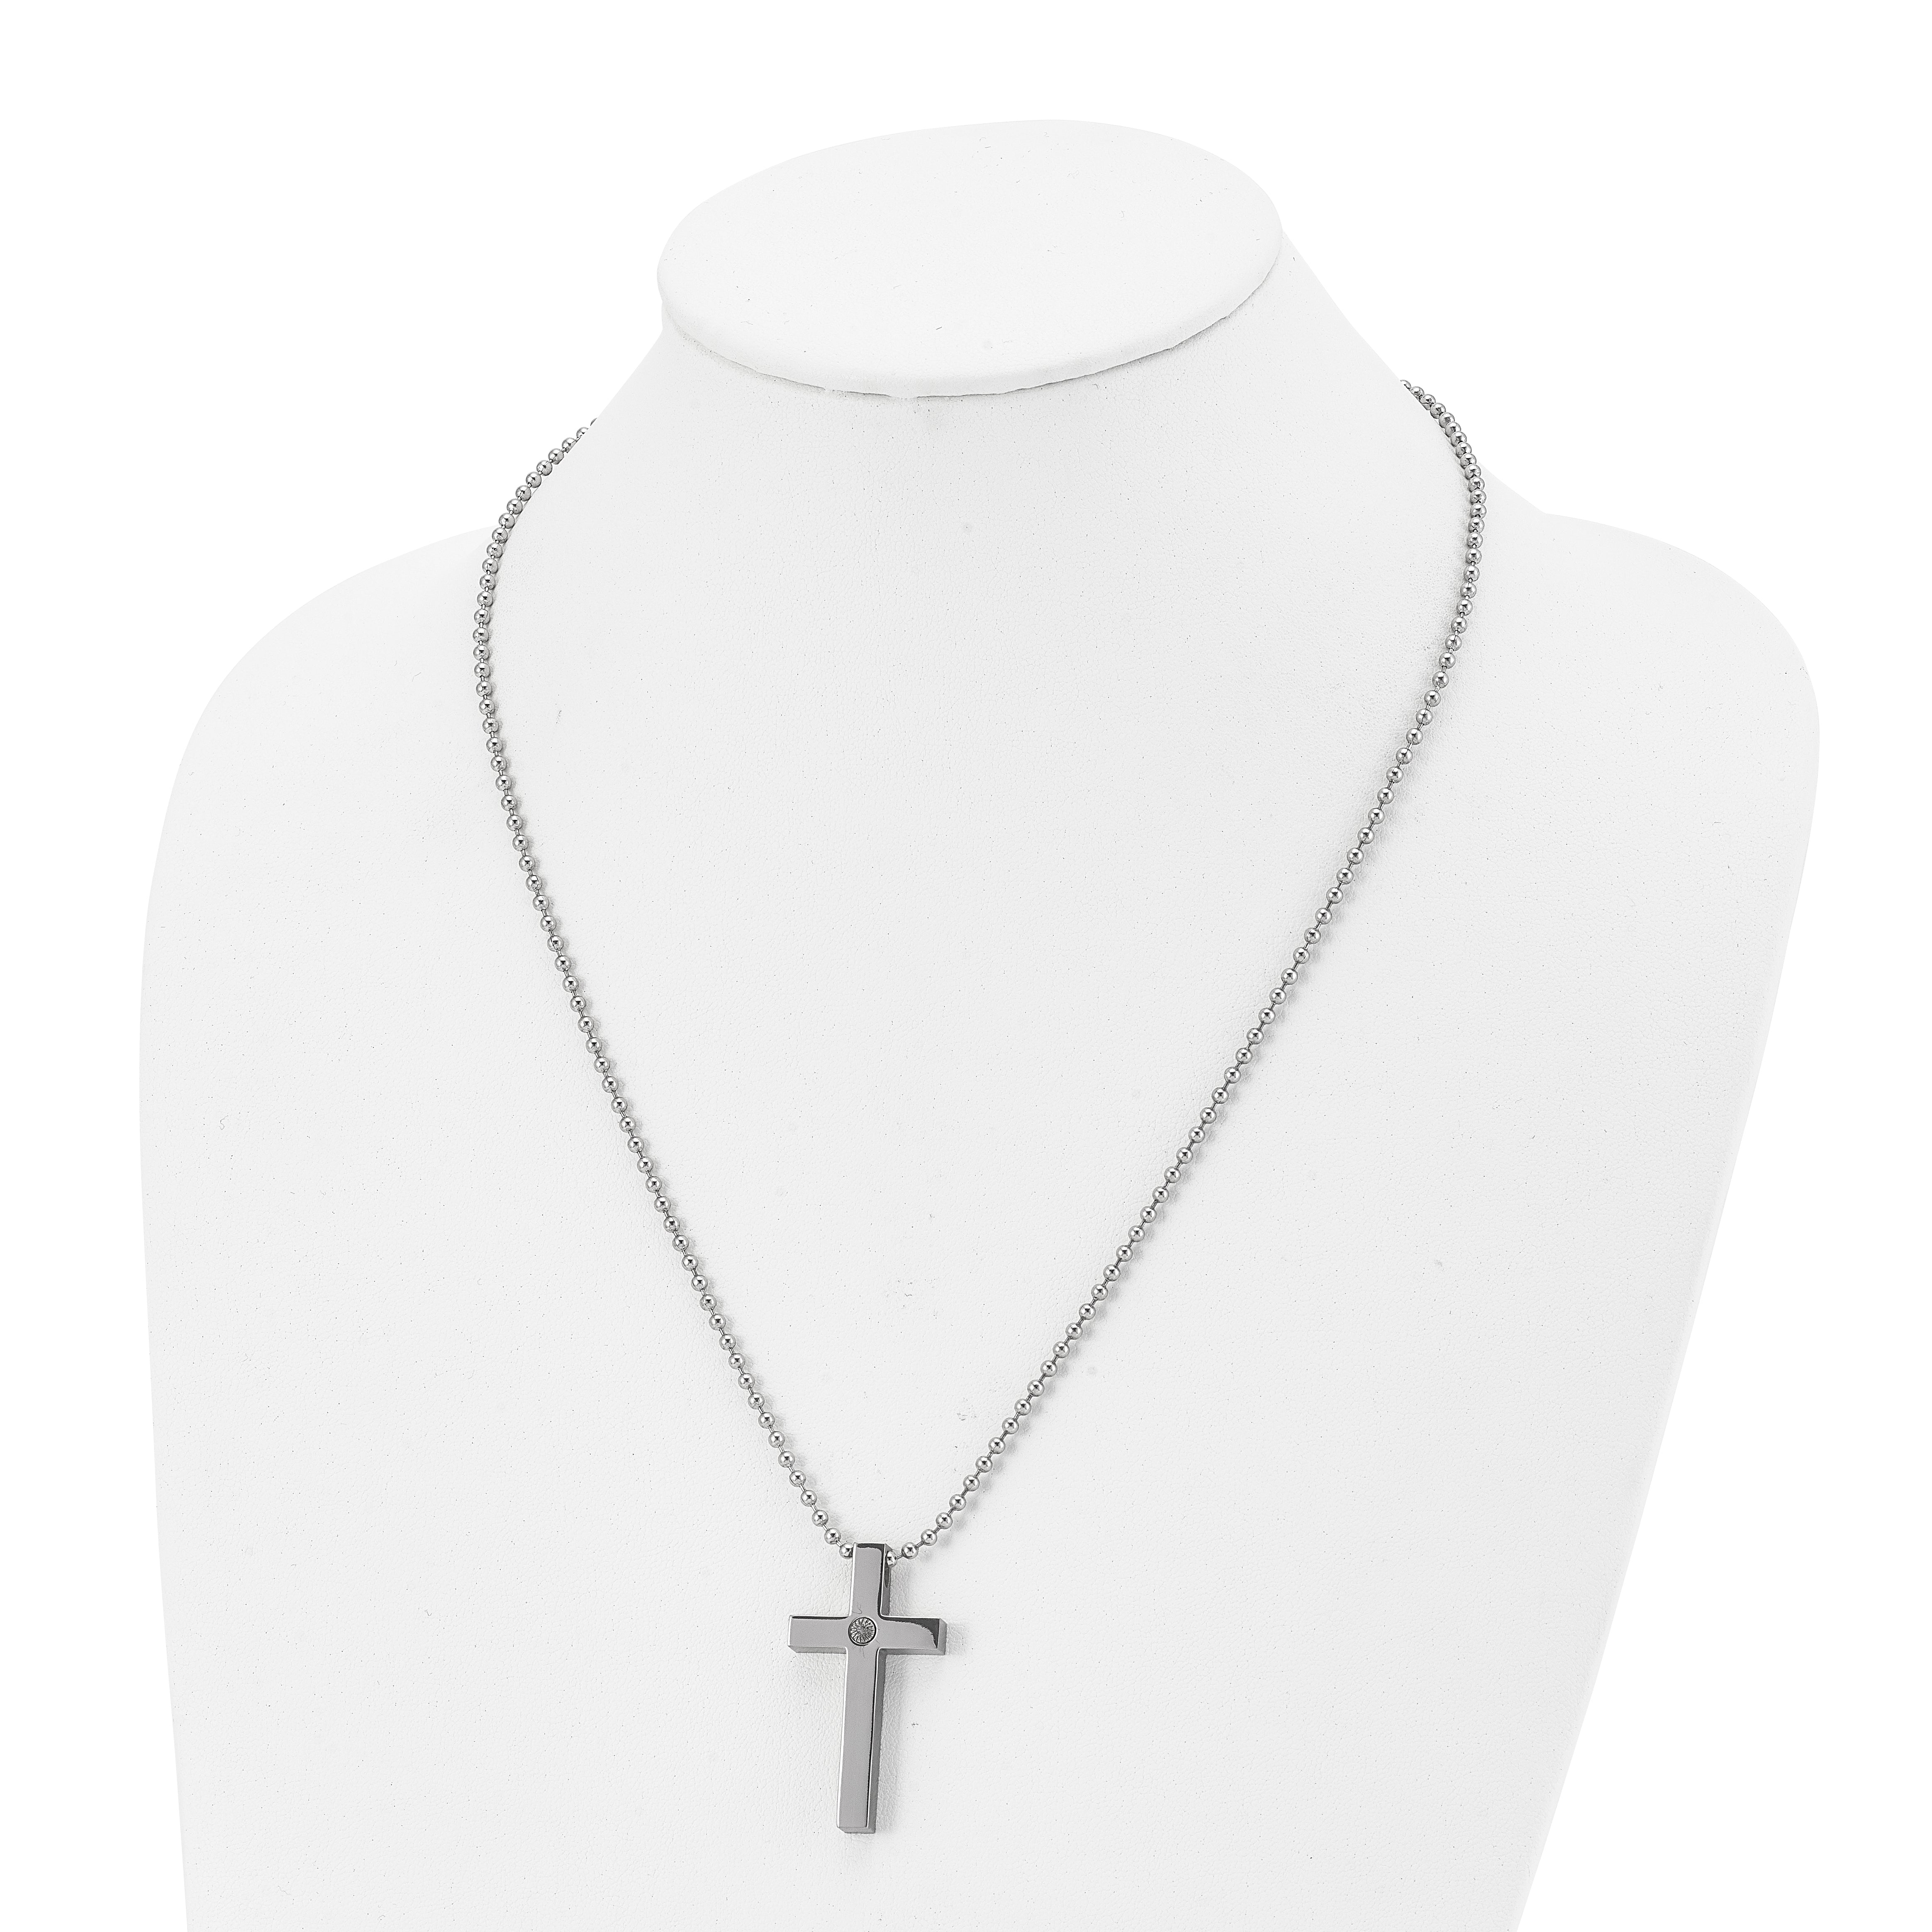 Chisel Titanium Polished with 1/2pt. Diamond Cross 22 inch Necklace